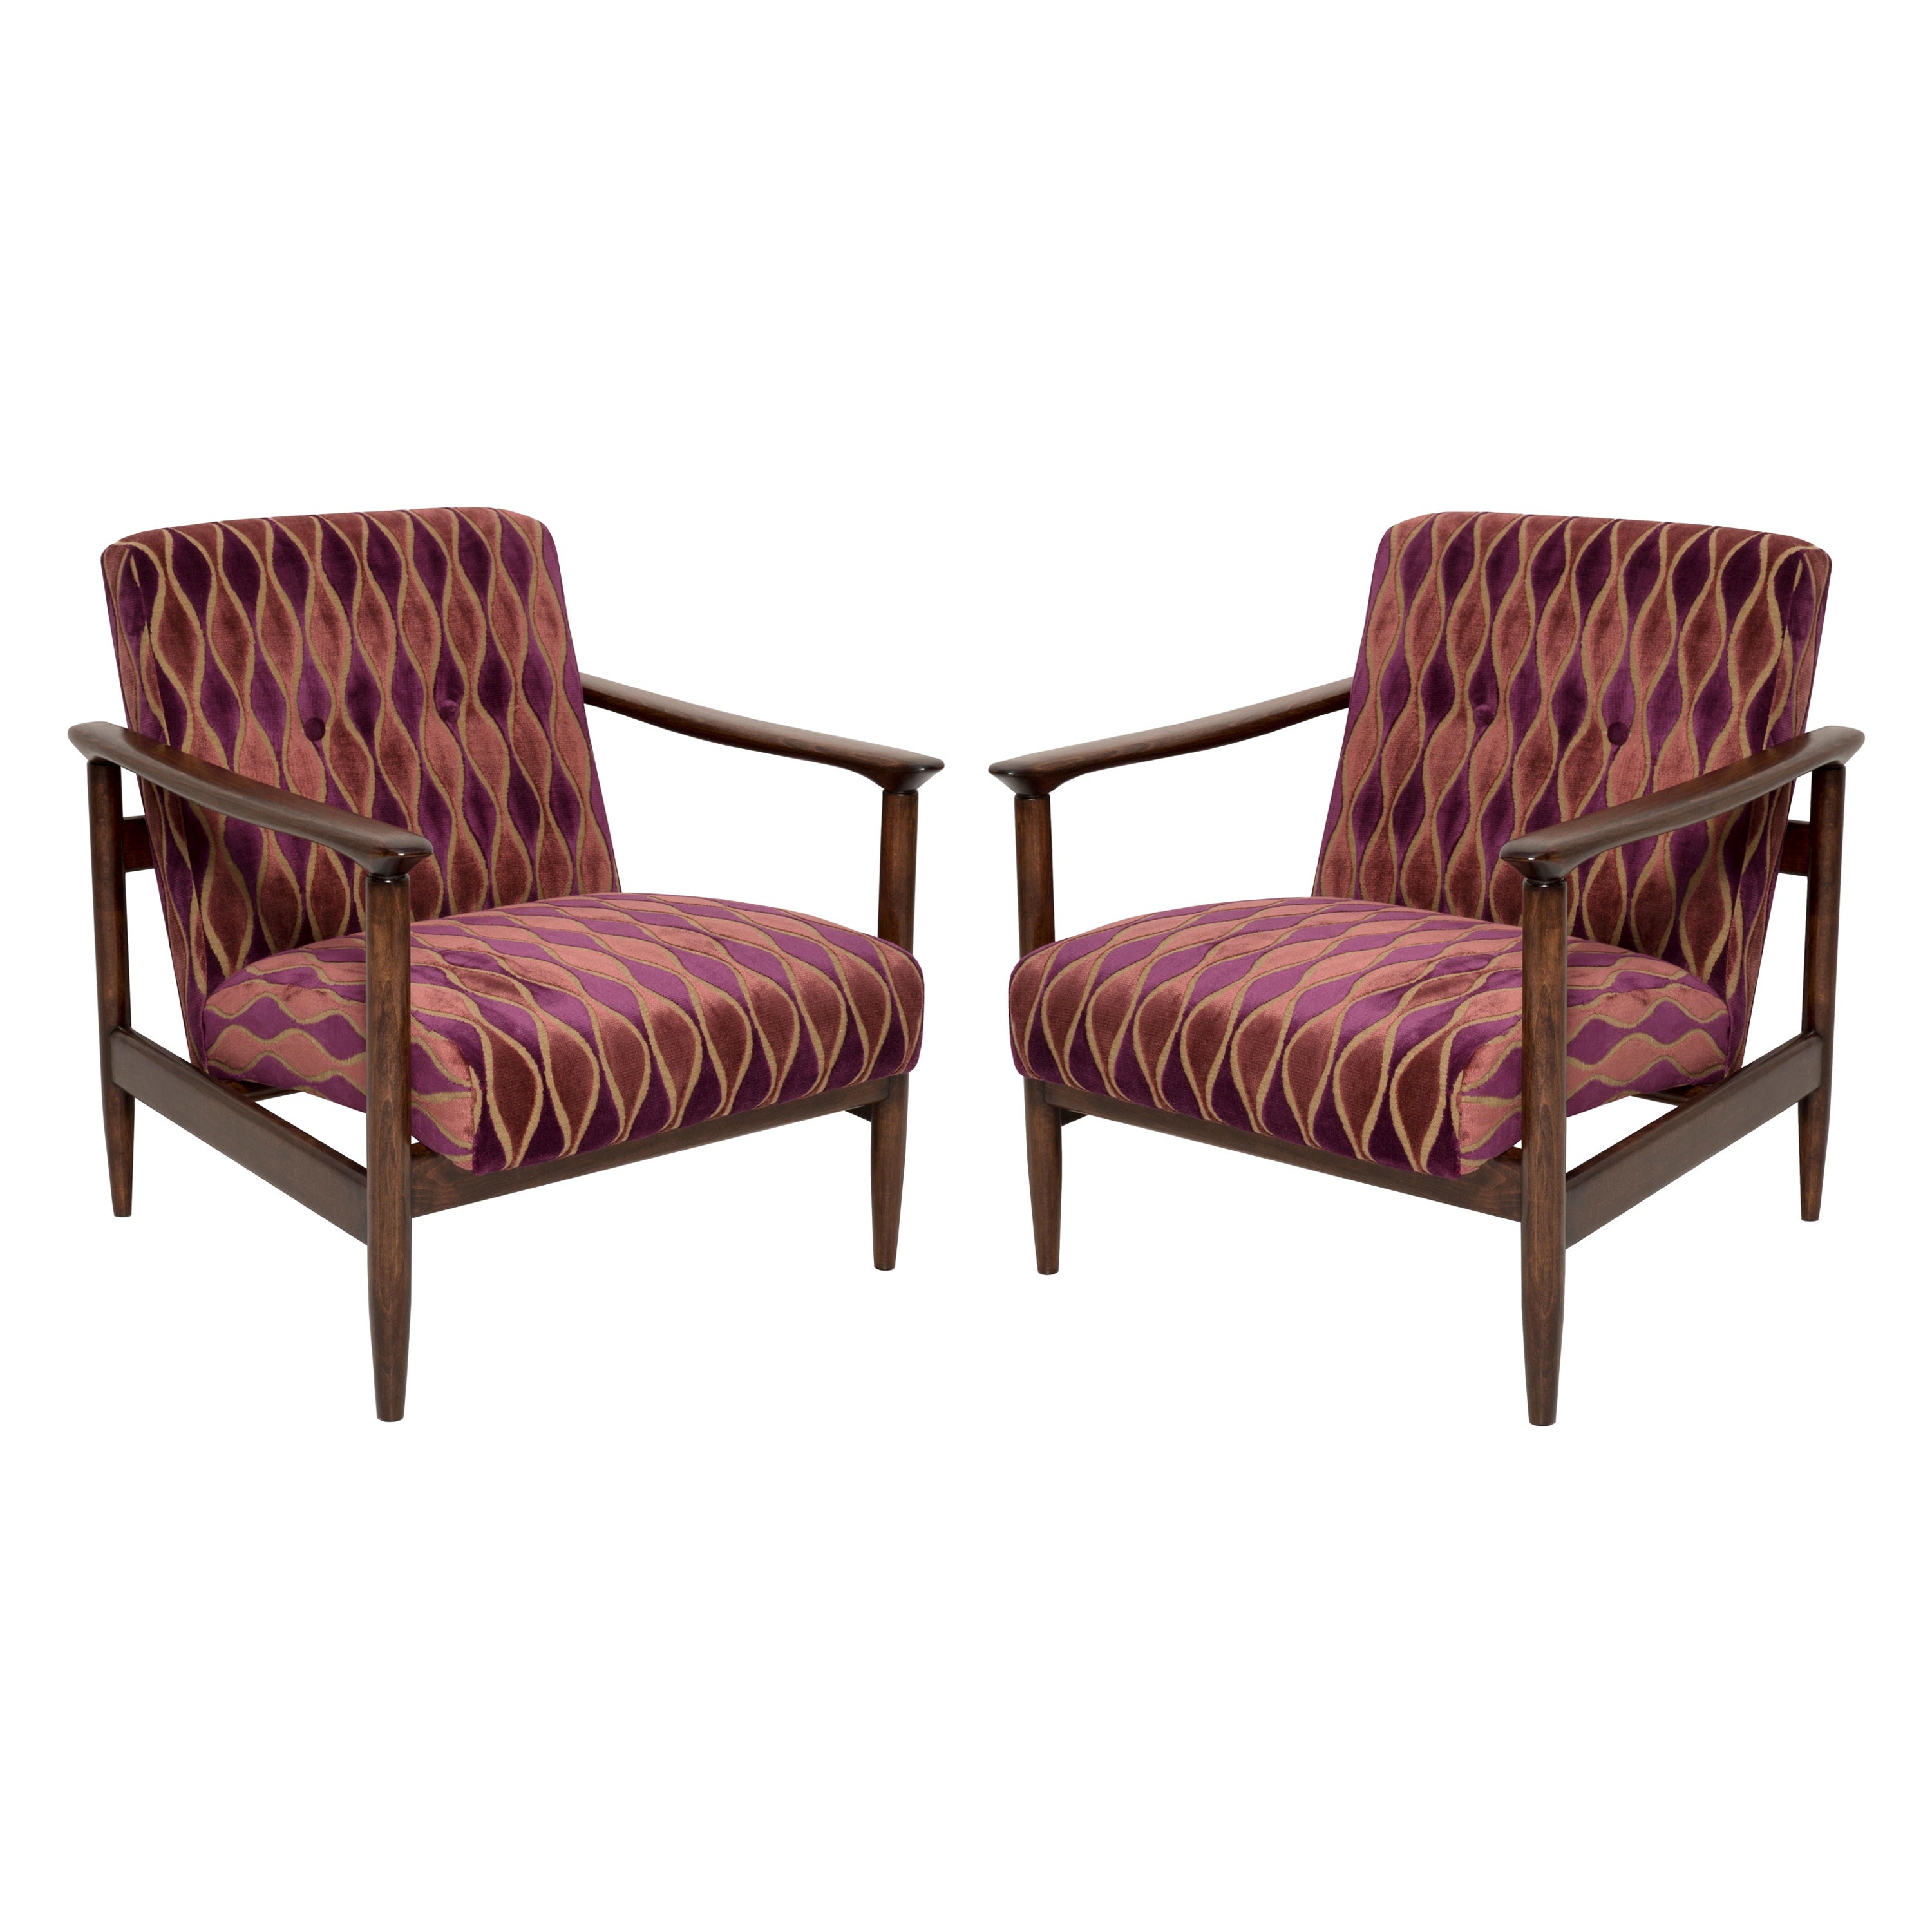 Two Mid-20th Century Pink Pattern Velvet Armchairs, Edmund Homa, Europe, 1960s For Sale